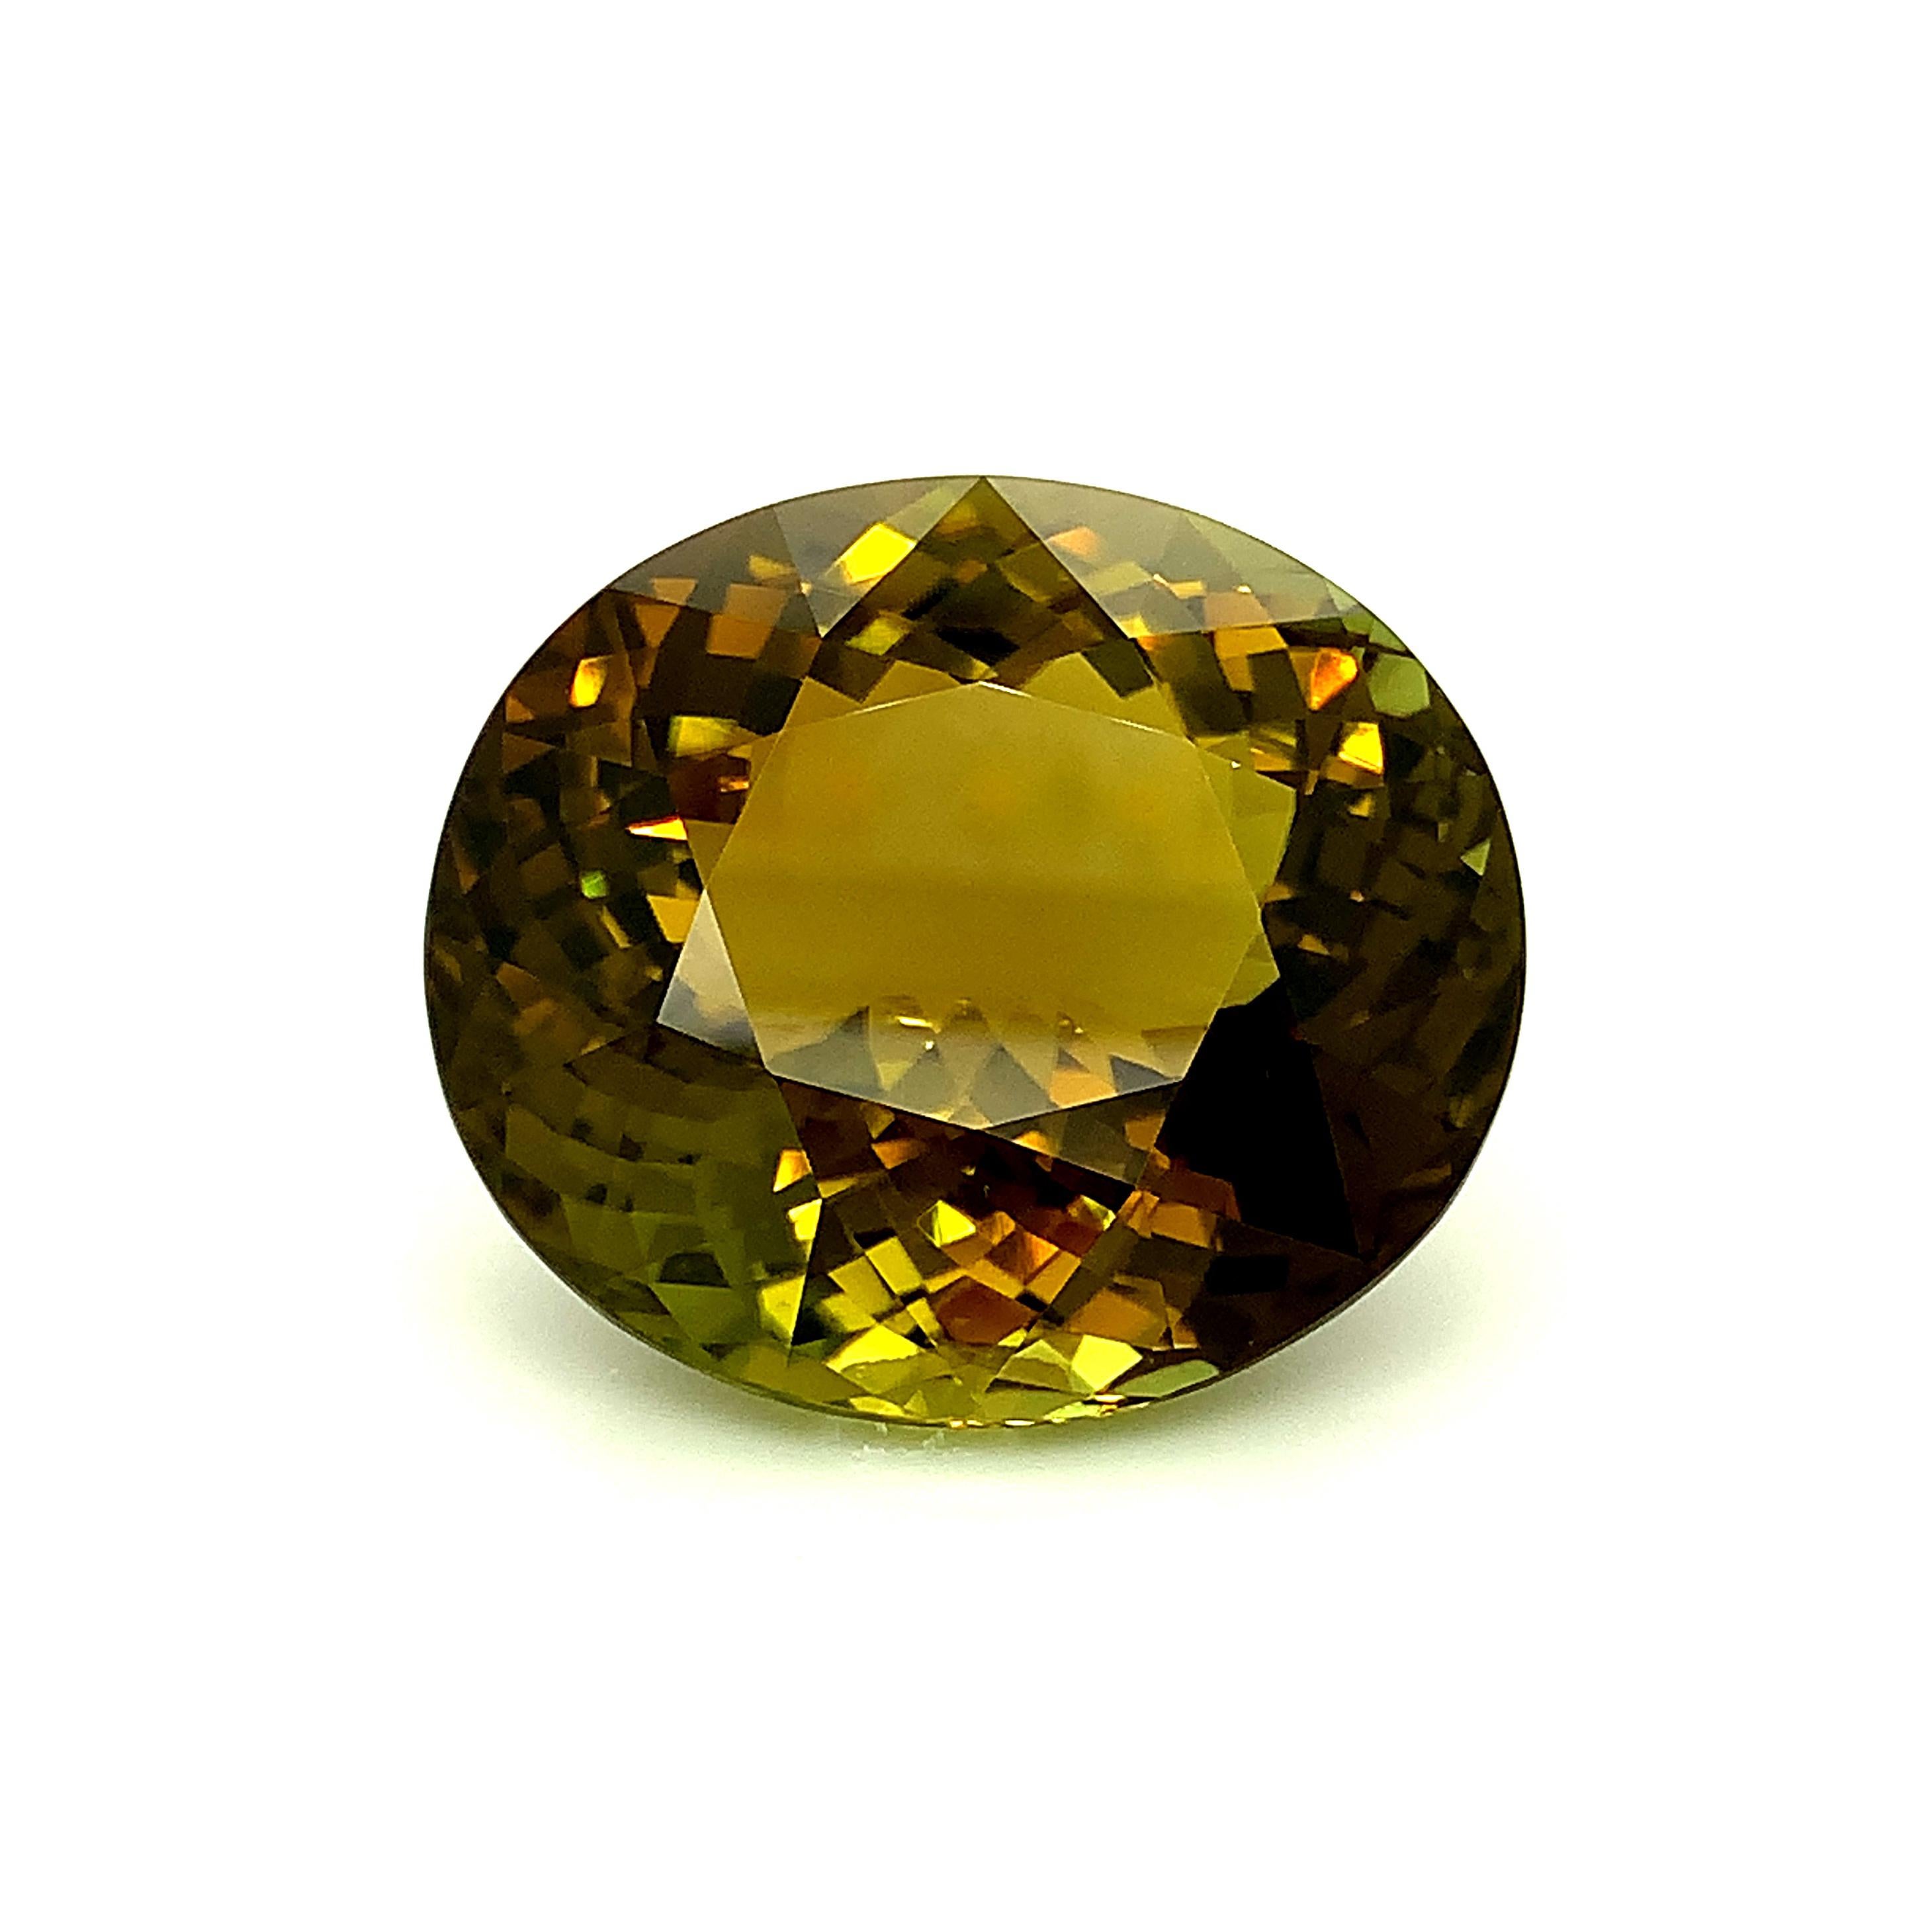 Artisan  79.78 Carat Golden Olive Tourmaline Oval, Loose Gemstone, GIA Certified ...A For Sale